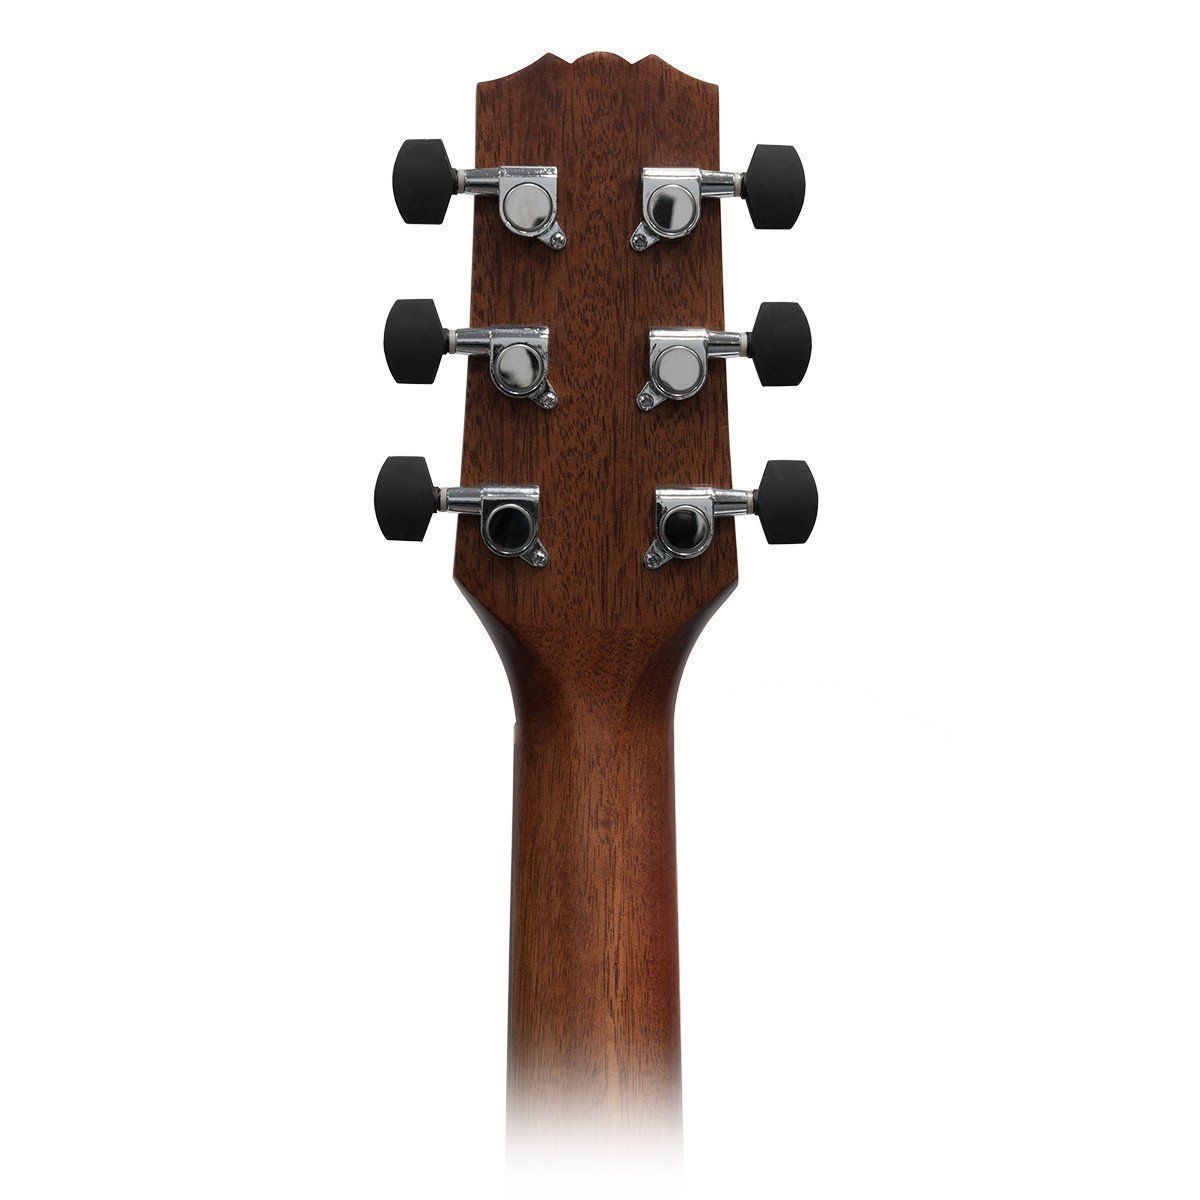 Martinez 'Natural Series' Left Handed Spruce Top Acoustic Dreadnought Guitar (Open Pore)